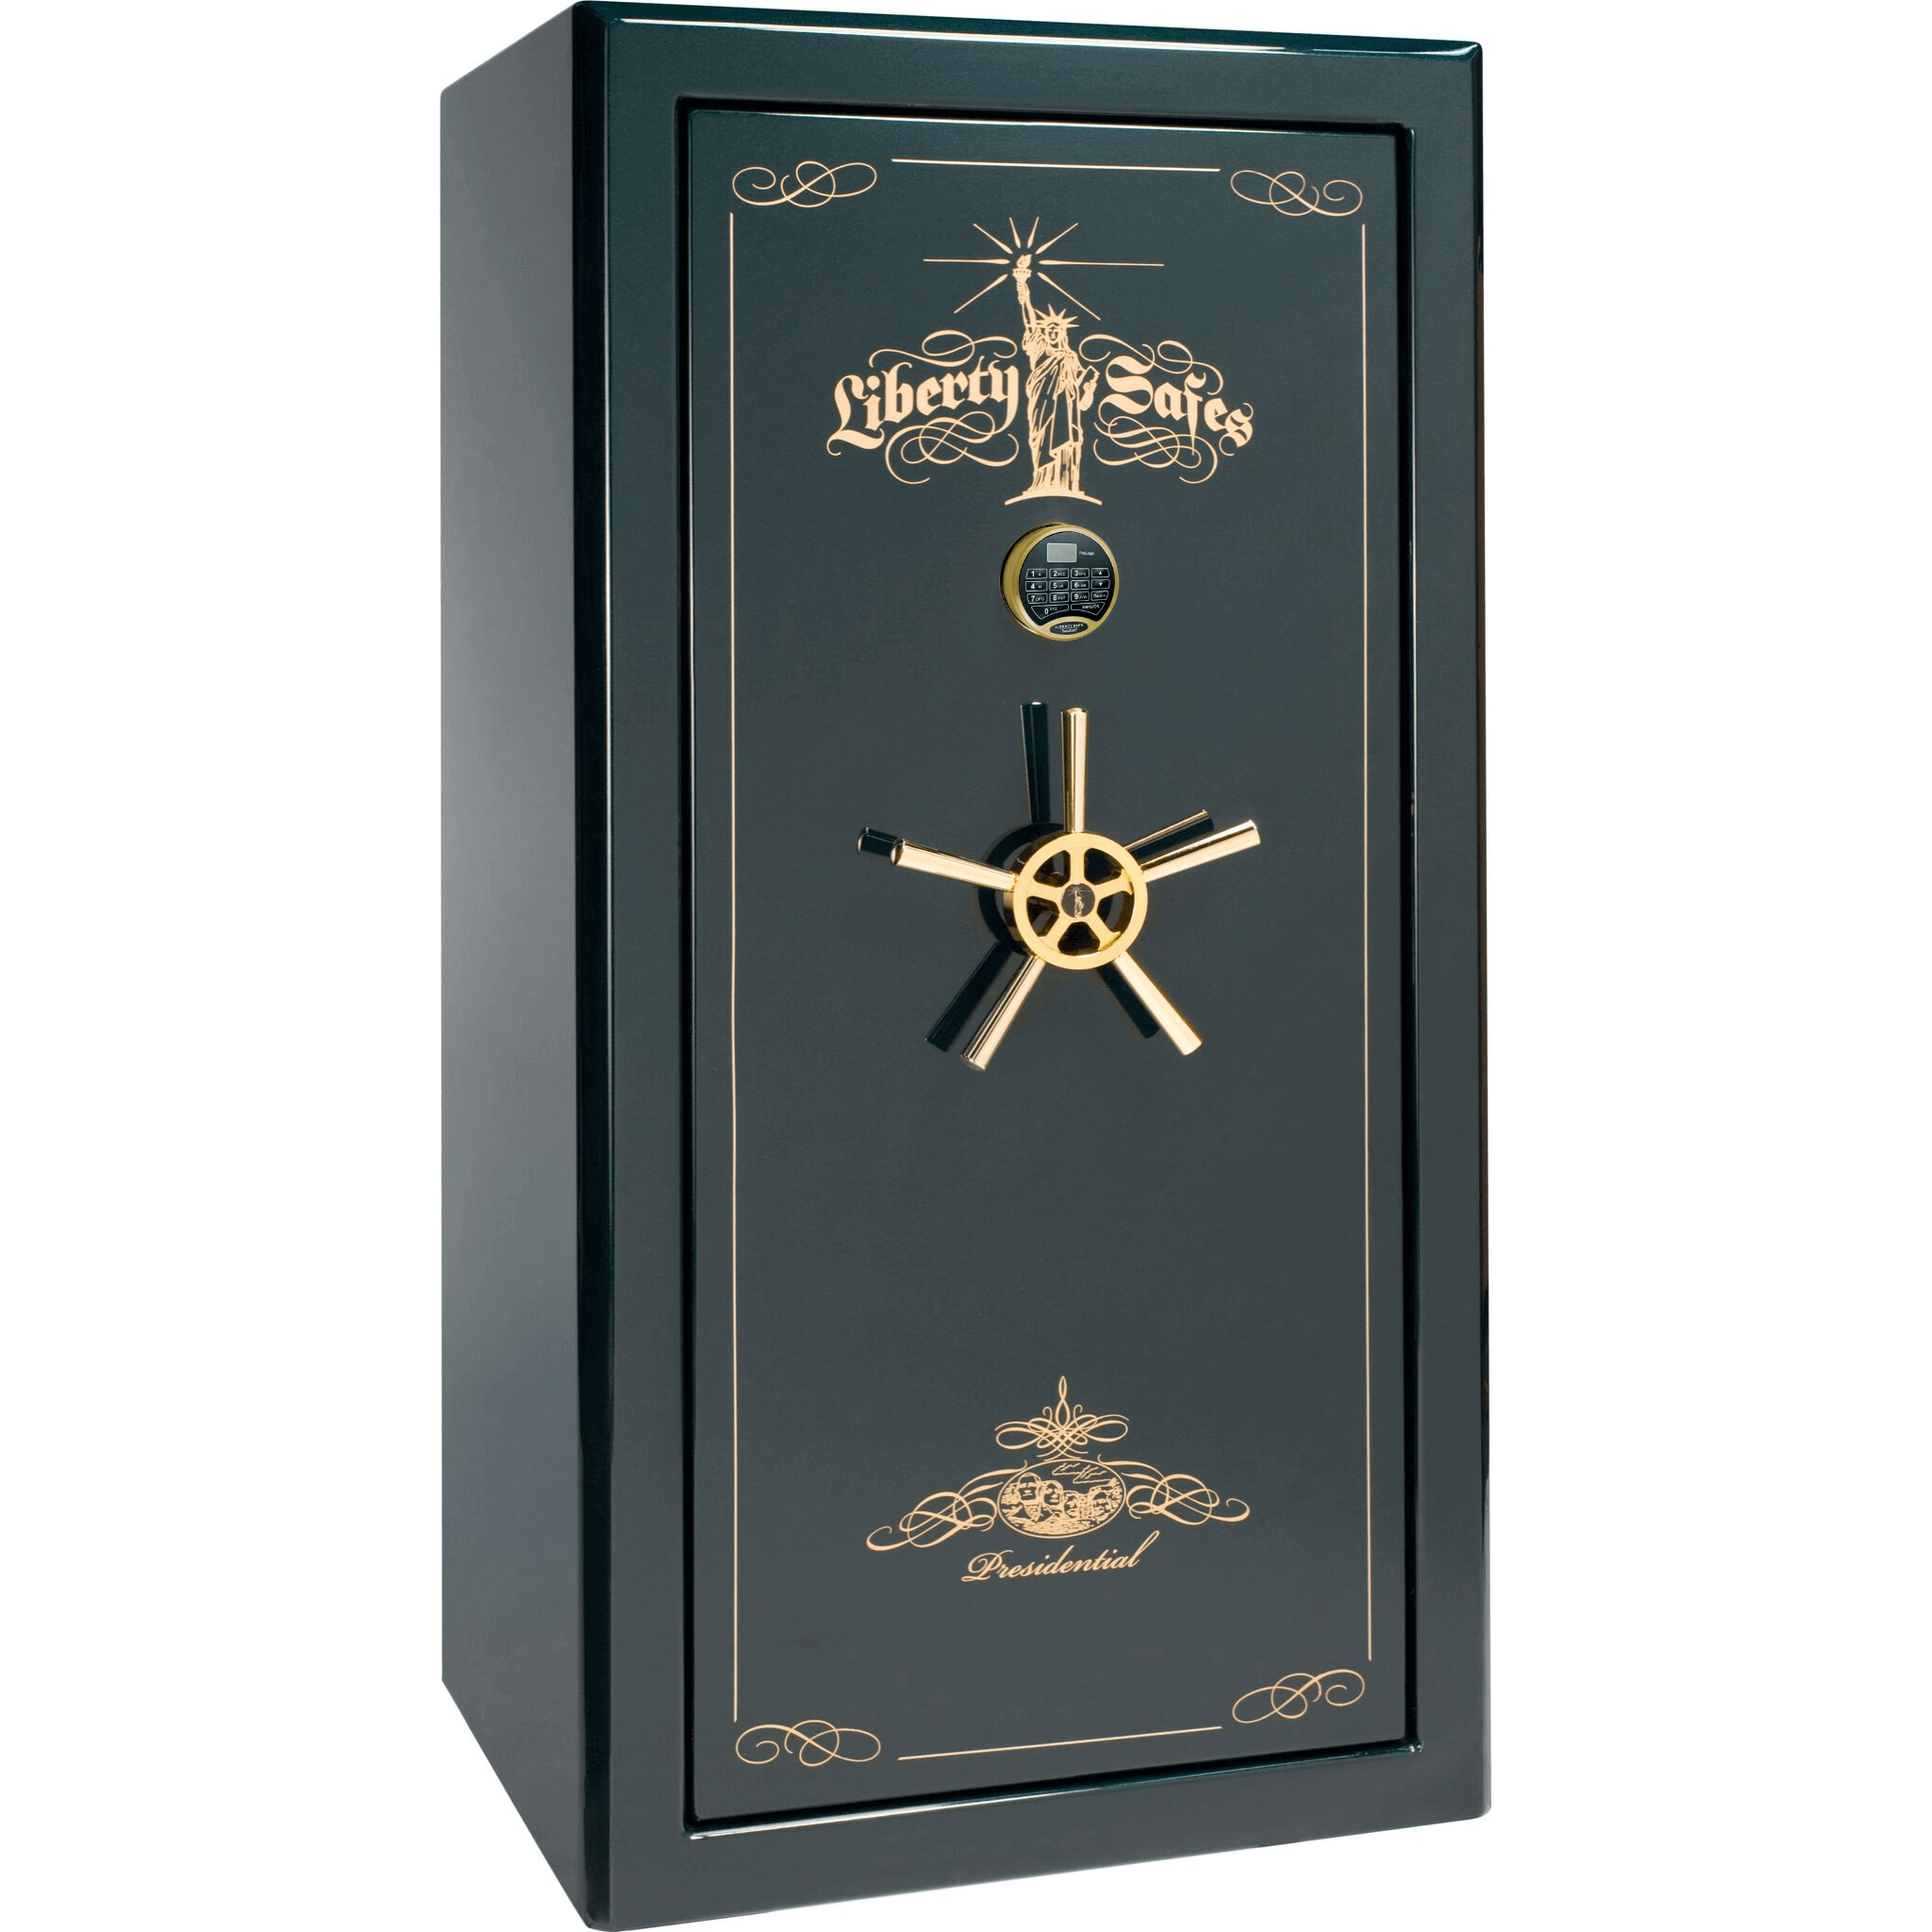 Presidential Series | Level 8 Security | 2.5 Hours Fire Protection | 25 | Dimensions: 60.5"(H) x 30.25"(W) x 28.5"(D) | Green Gloss Gold Hardware | Electronic Lock